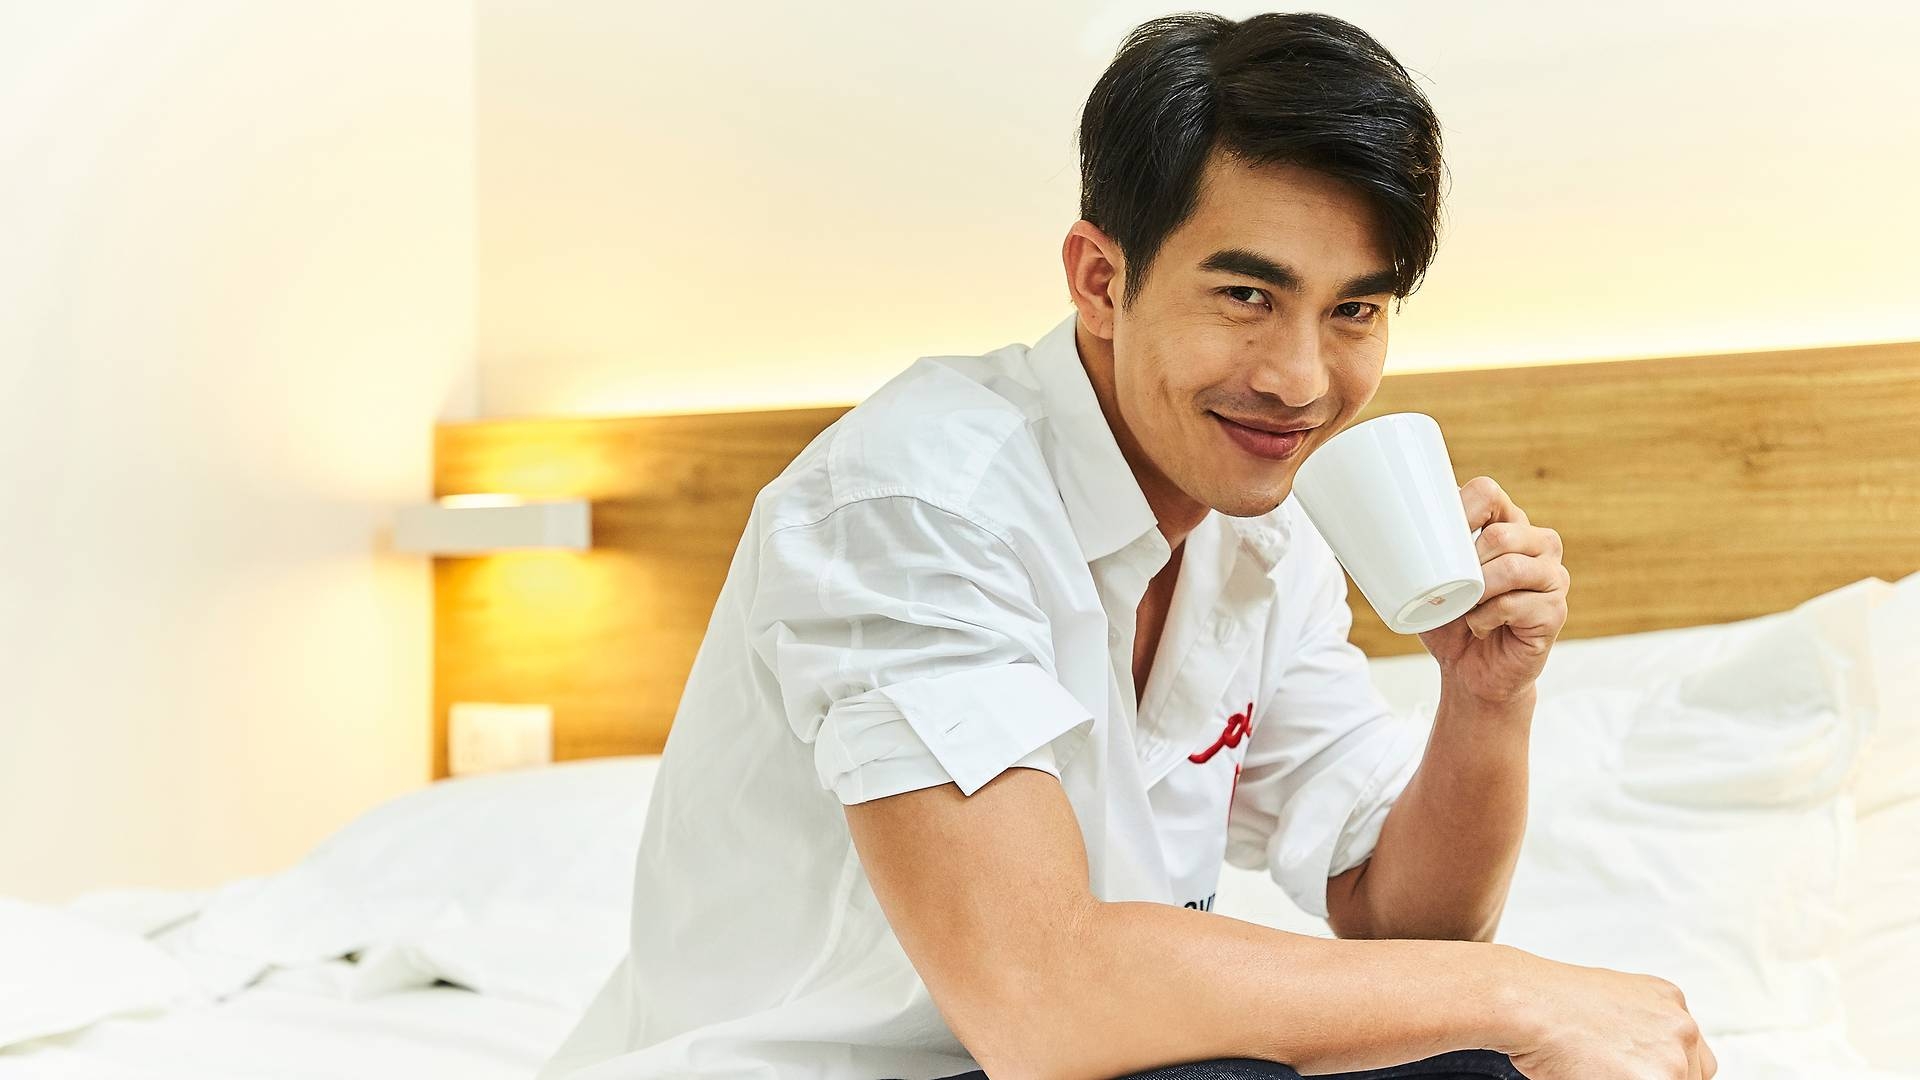 Top 10 Most Handsome Men in Singapore Right Now!